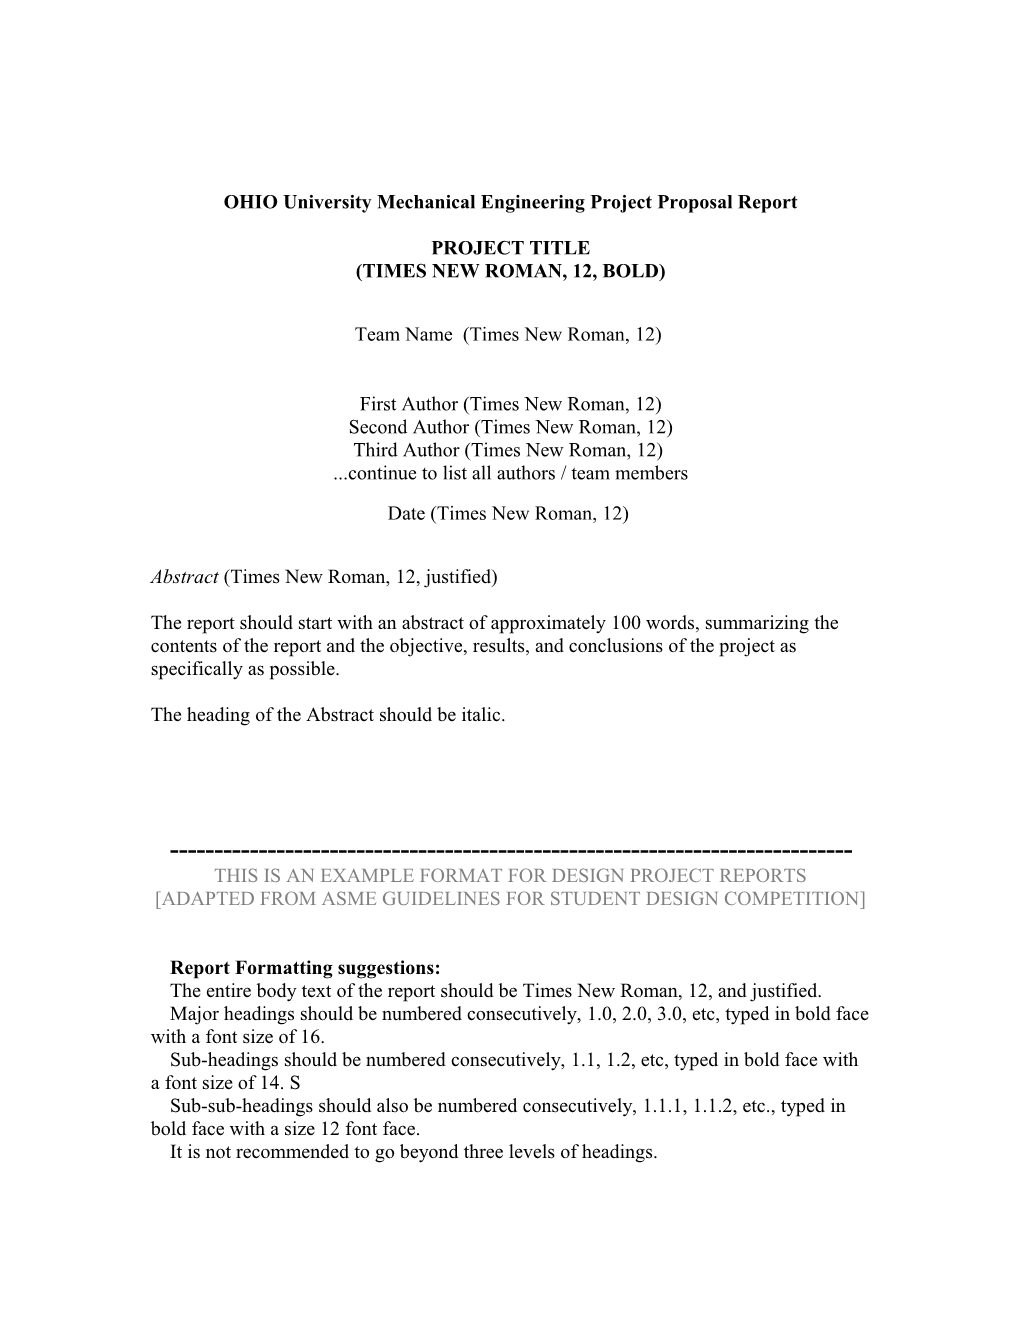 Asme DESIGN Project Report Guidelines